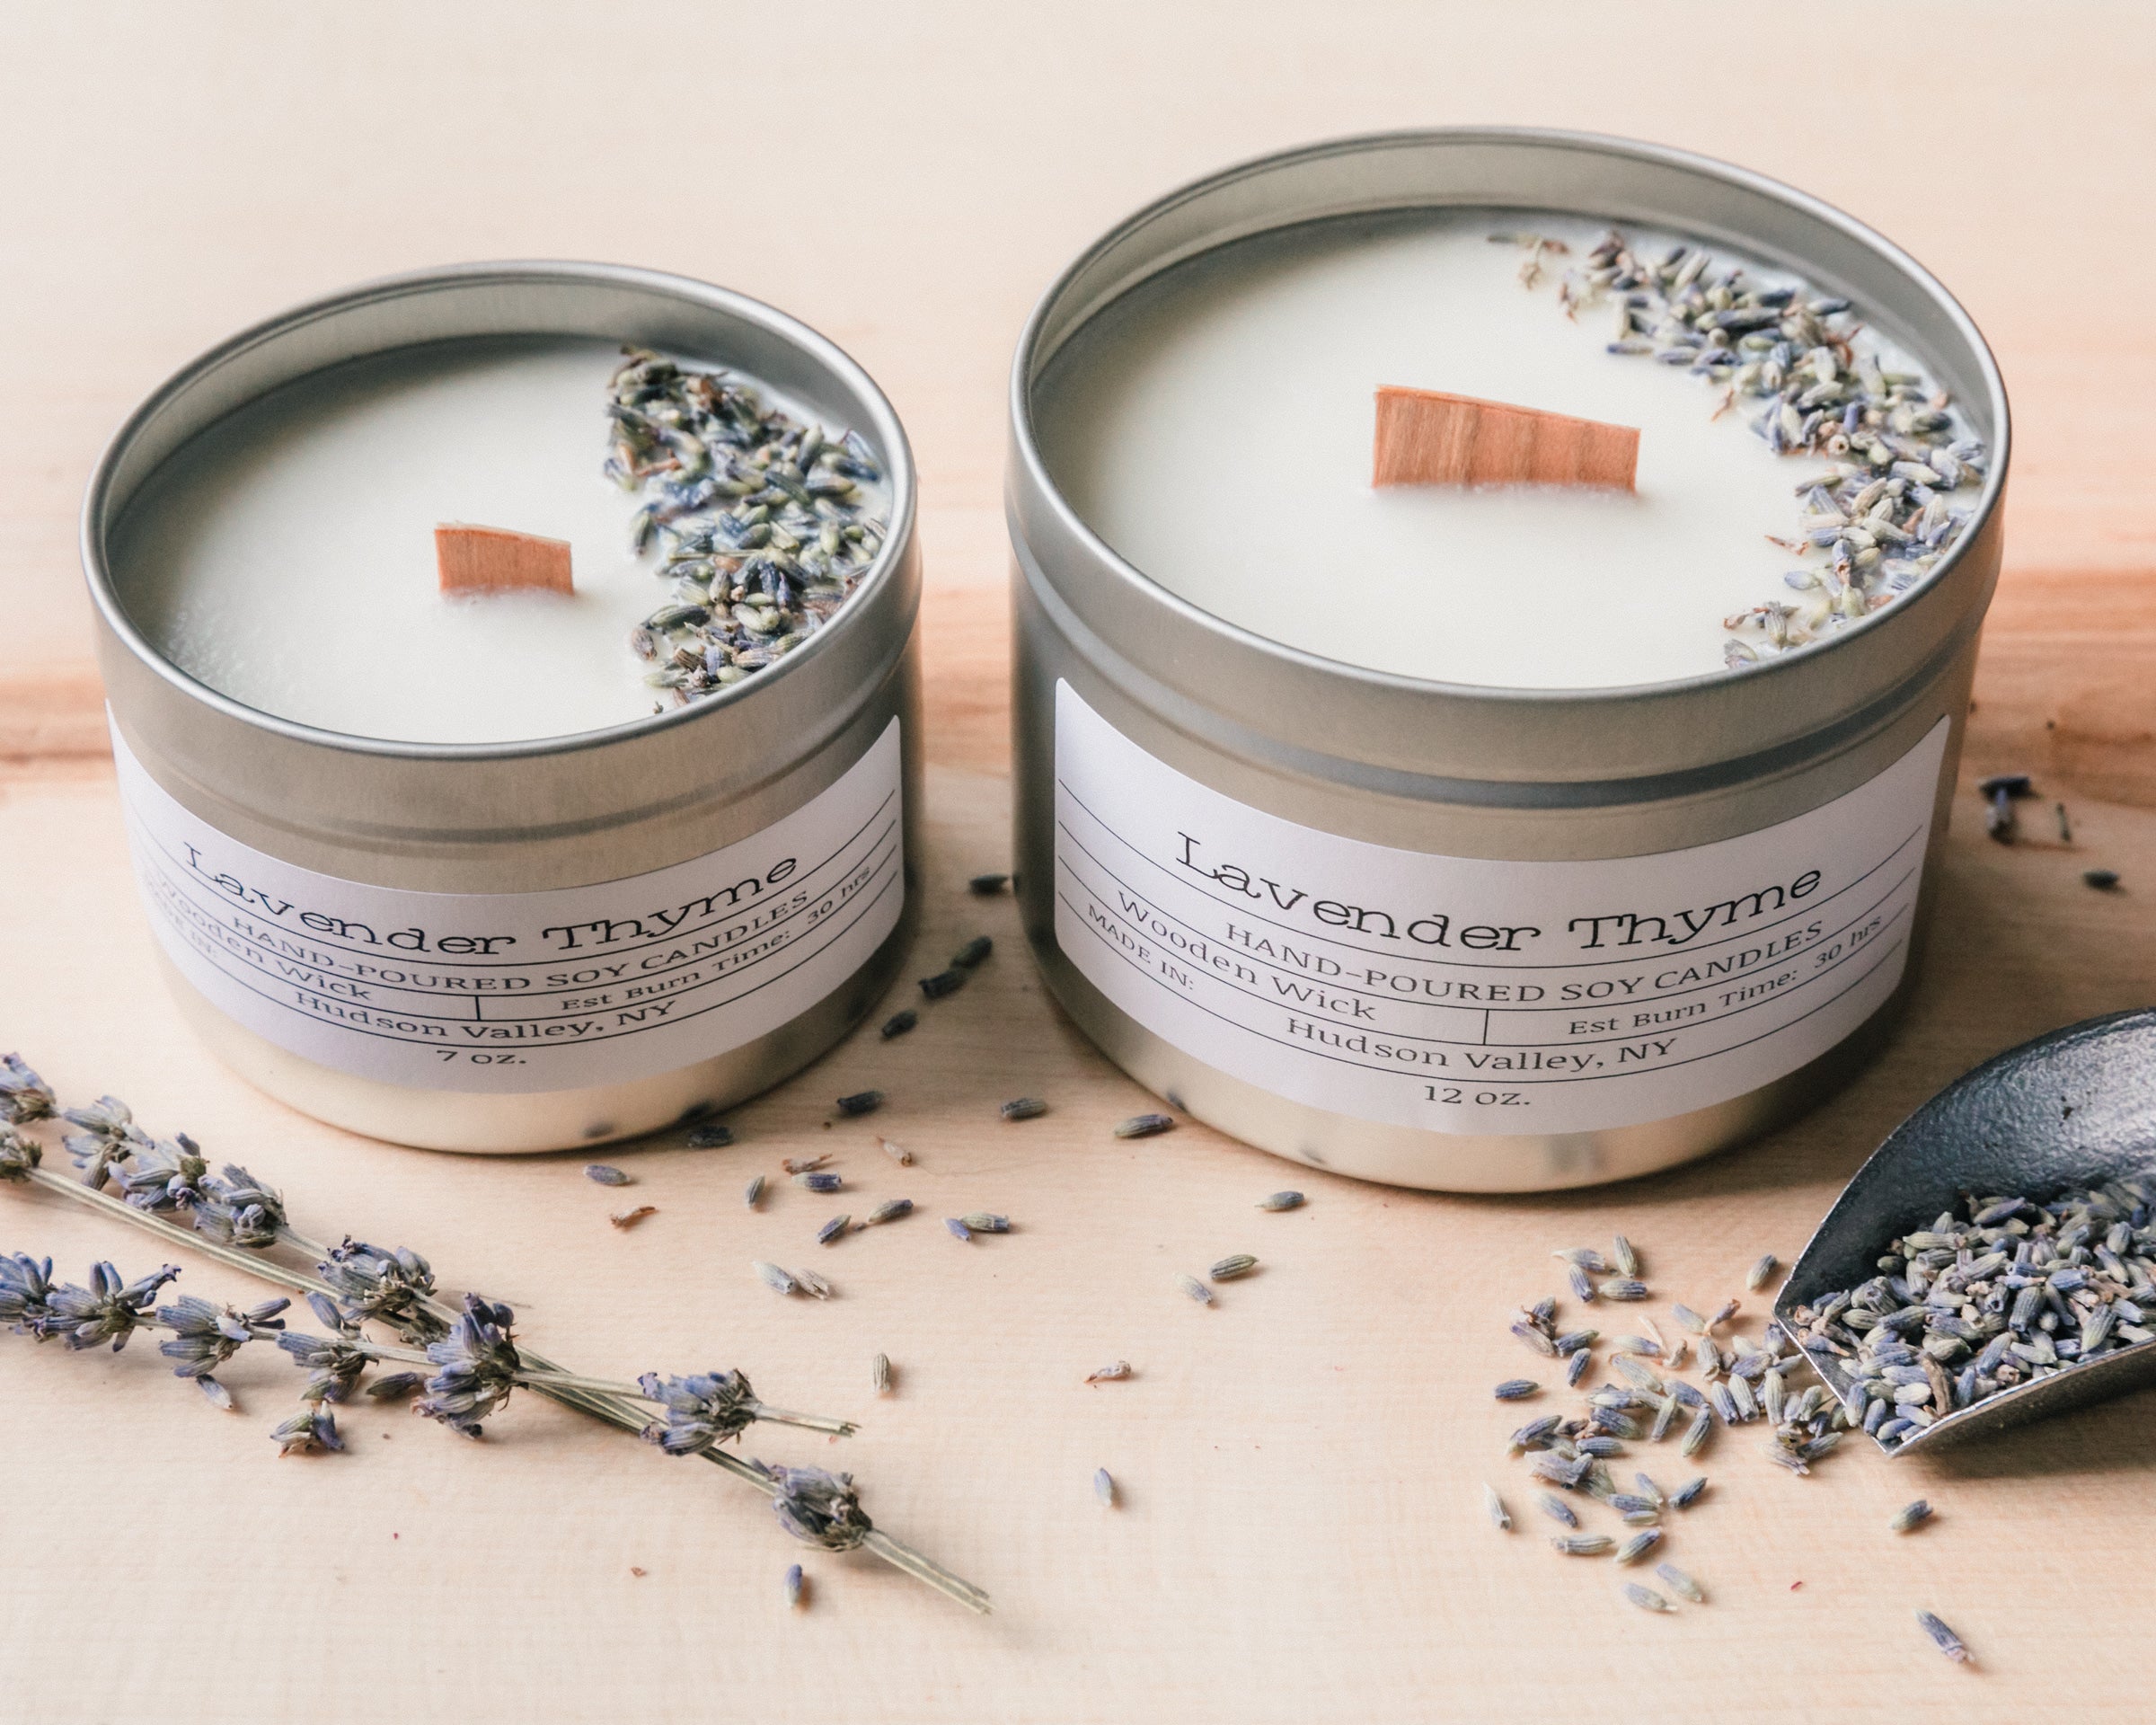 Lavender Thyme Candle